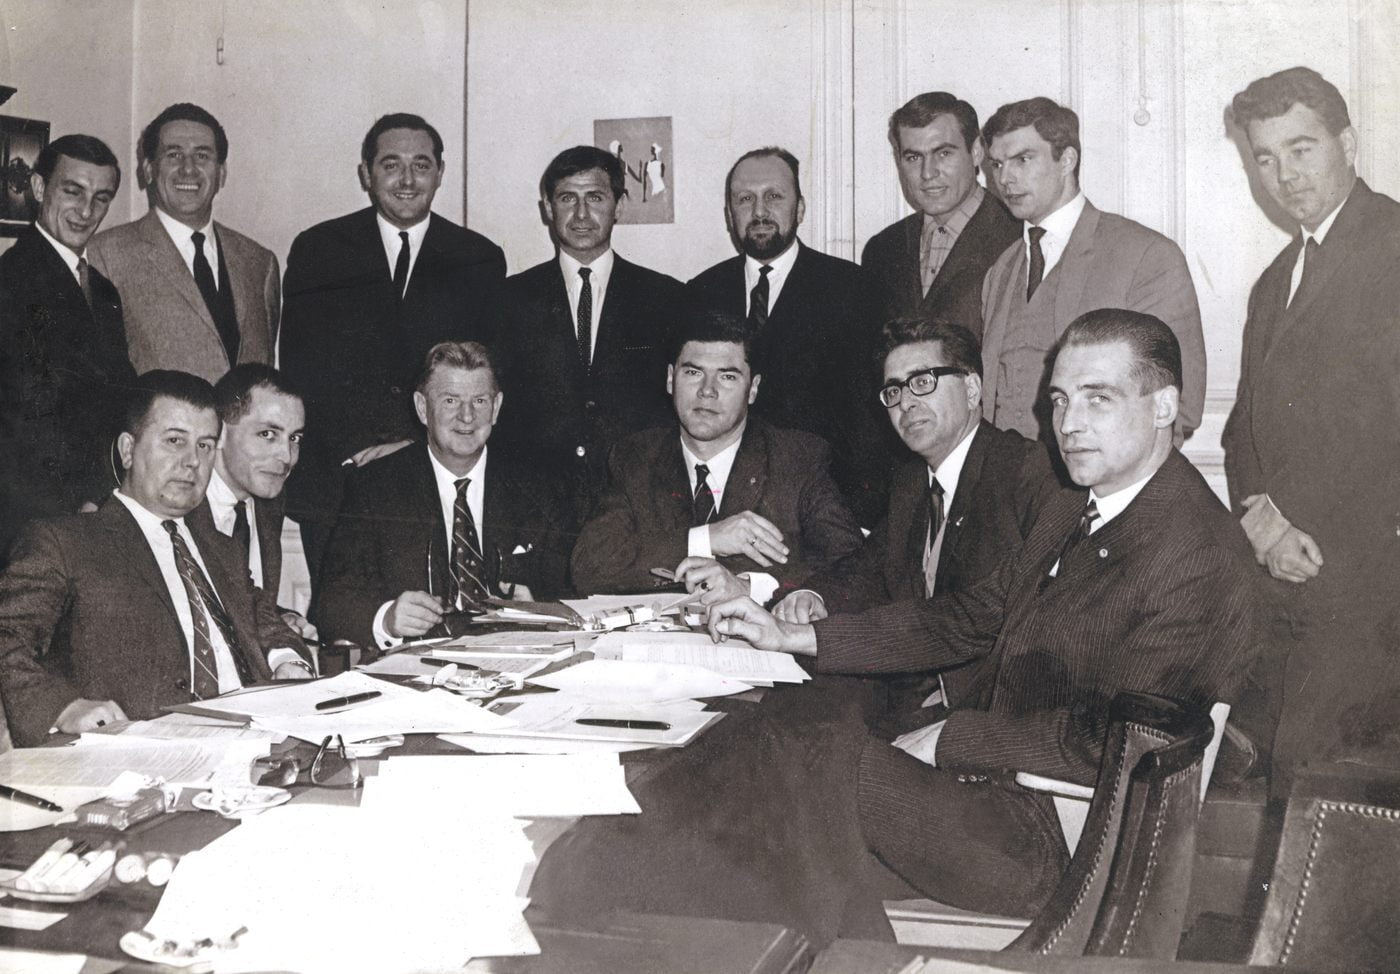 December 15, 1965, founding act of Fifpro, with in the center behind from left to right: Roger Blanpain, Michel Hidalgo and Jacques Bertrand